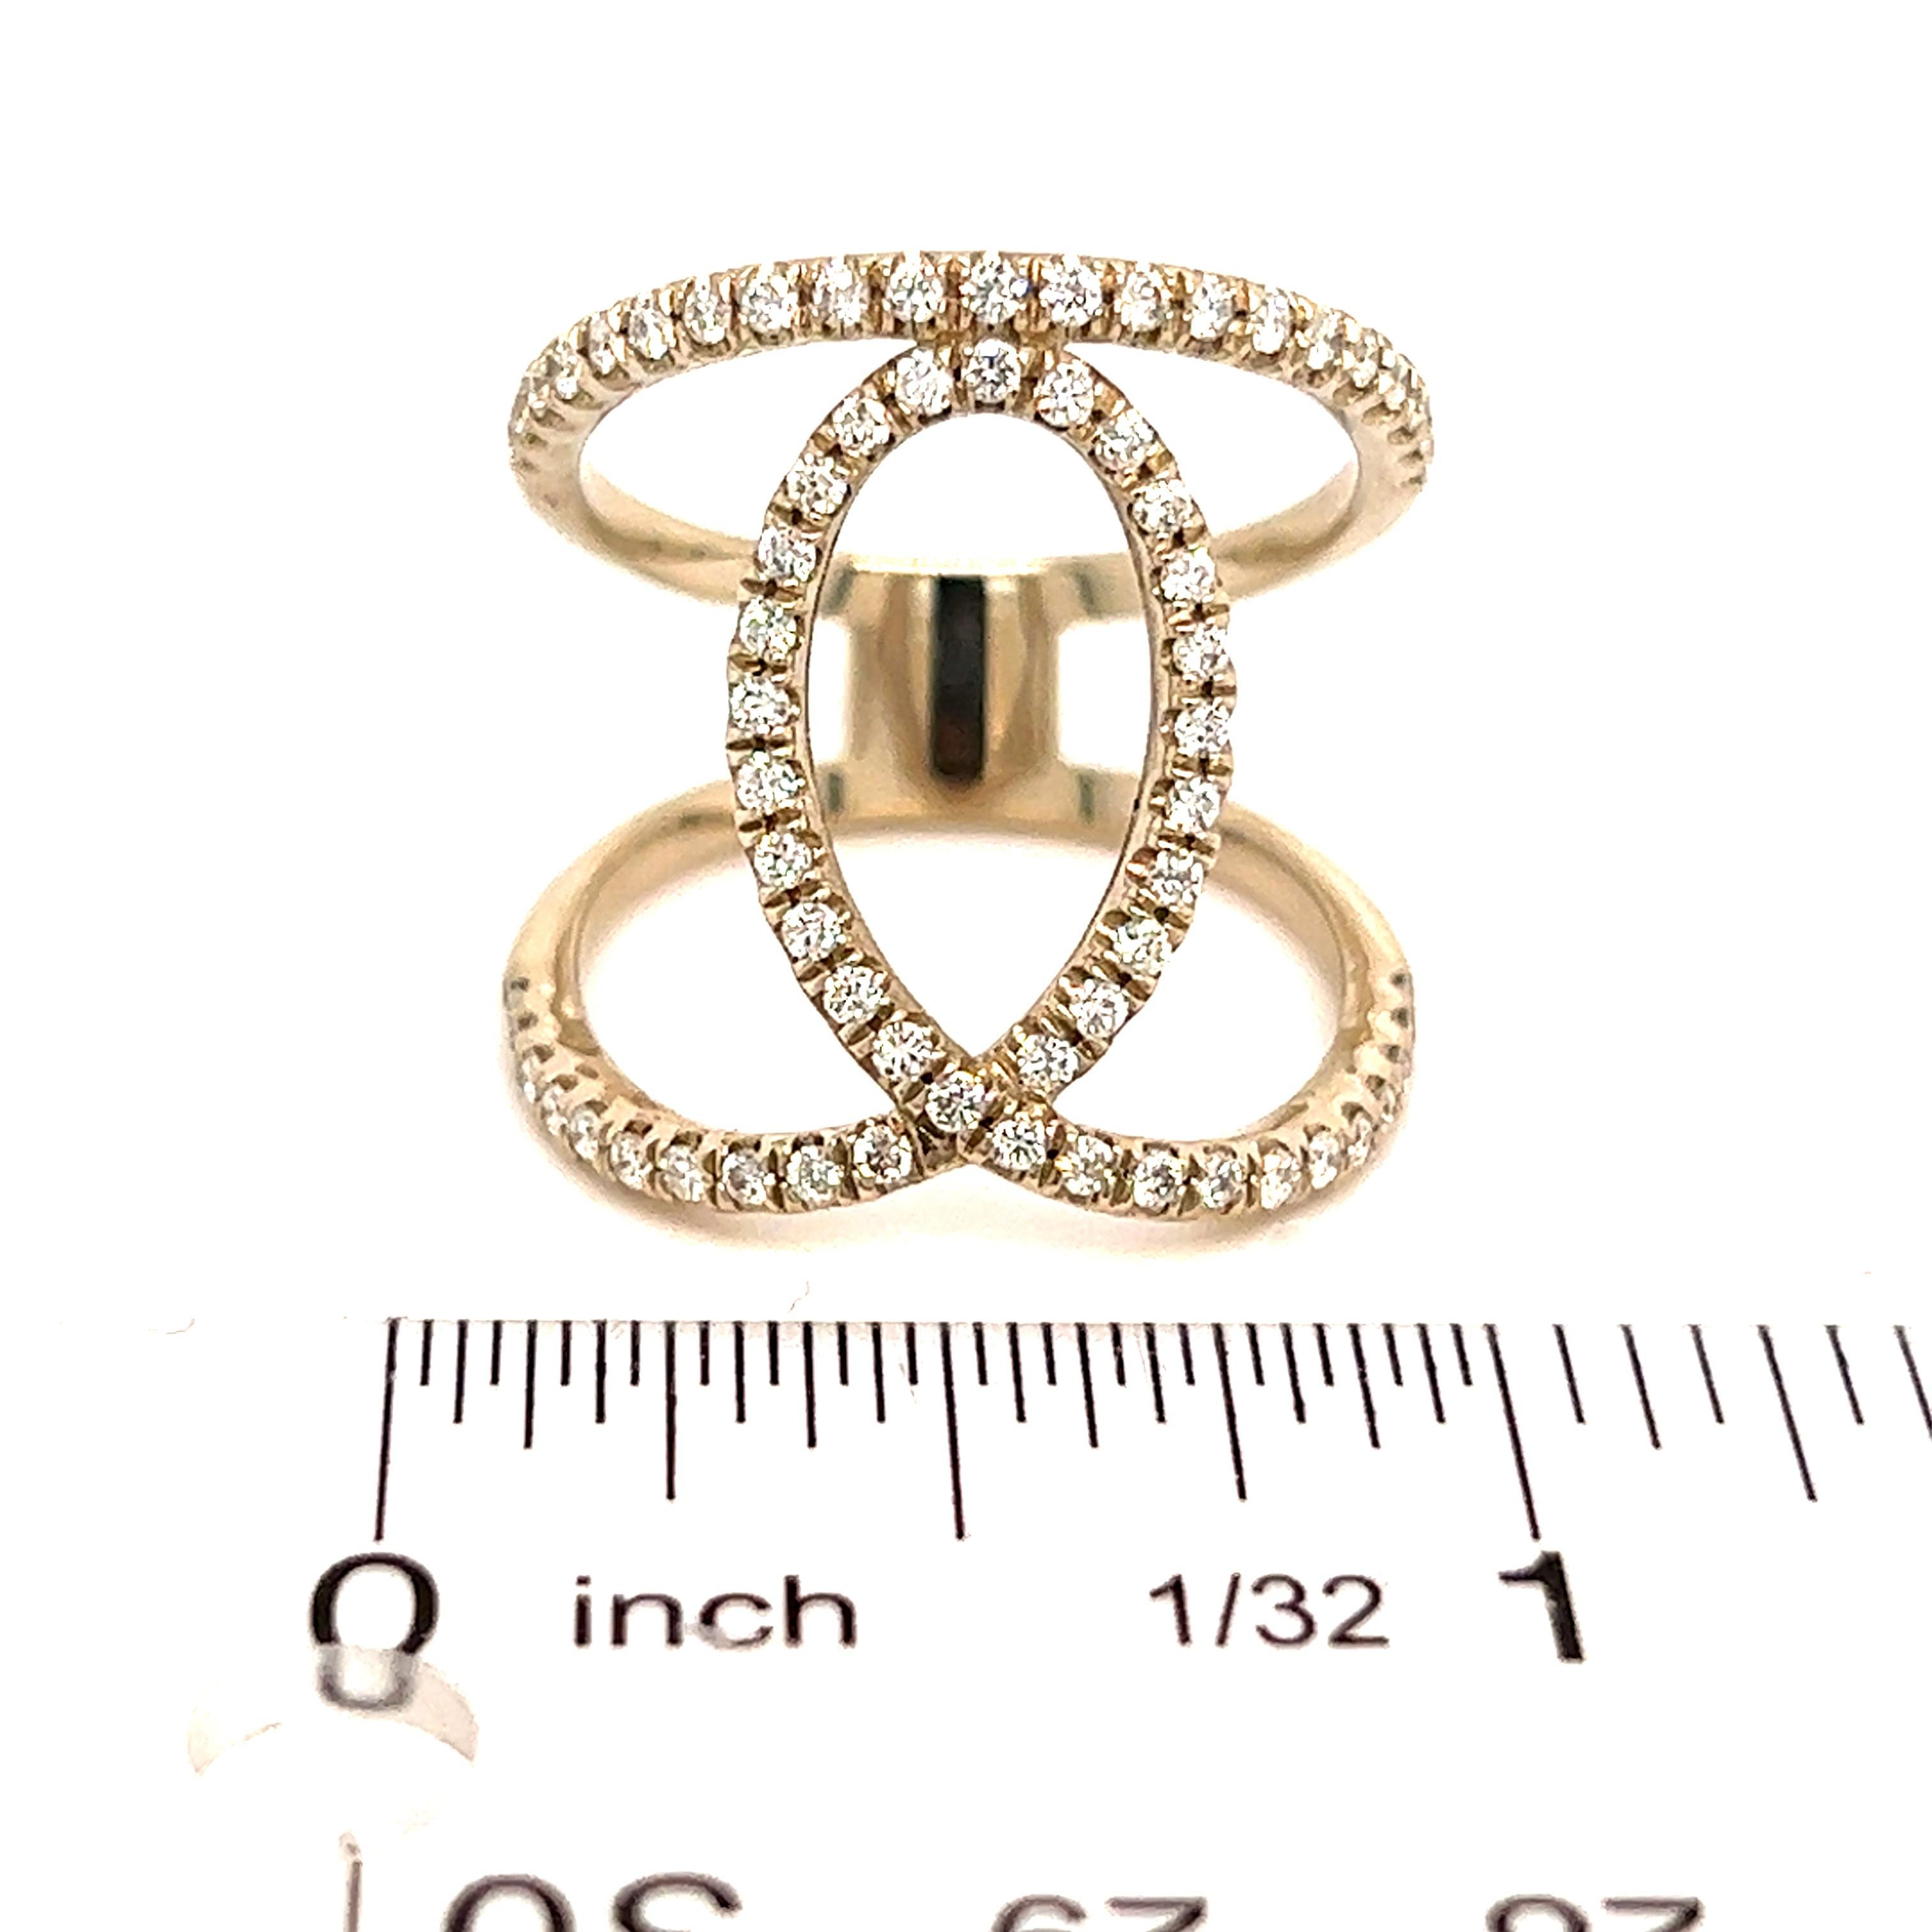 Round Cut Diamond Ring 14k Gold 0.85 TCW Certified For Sale